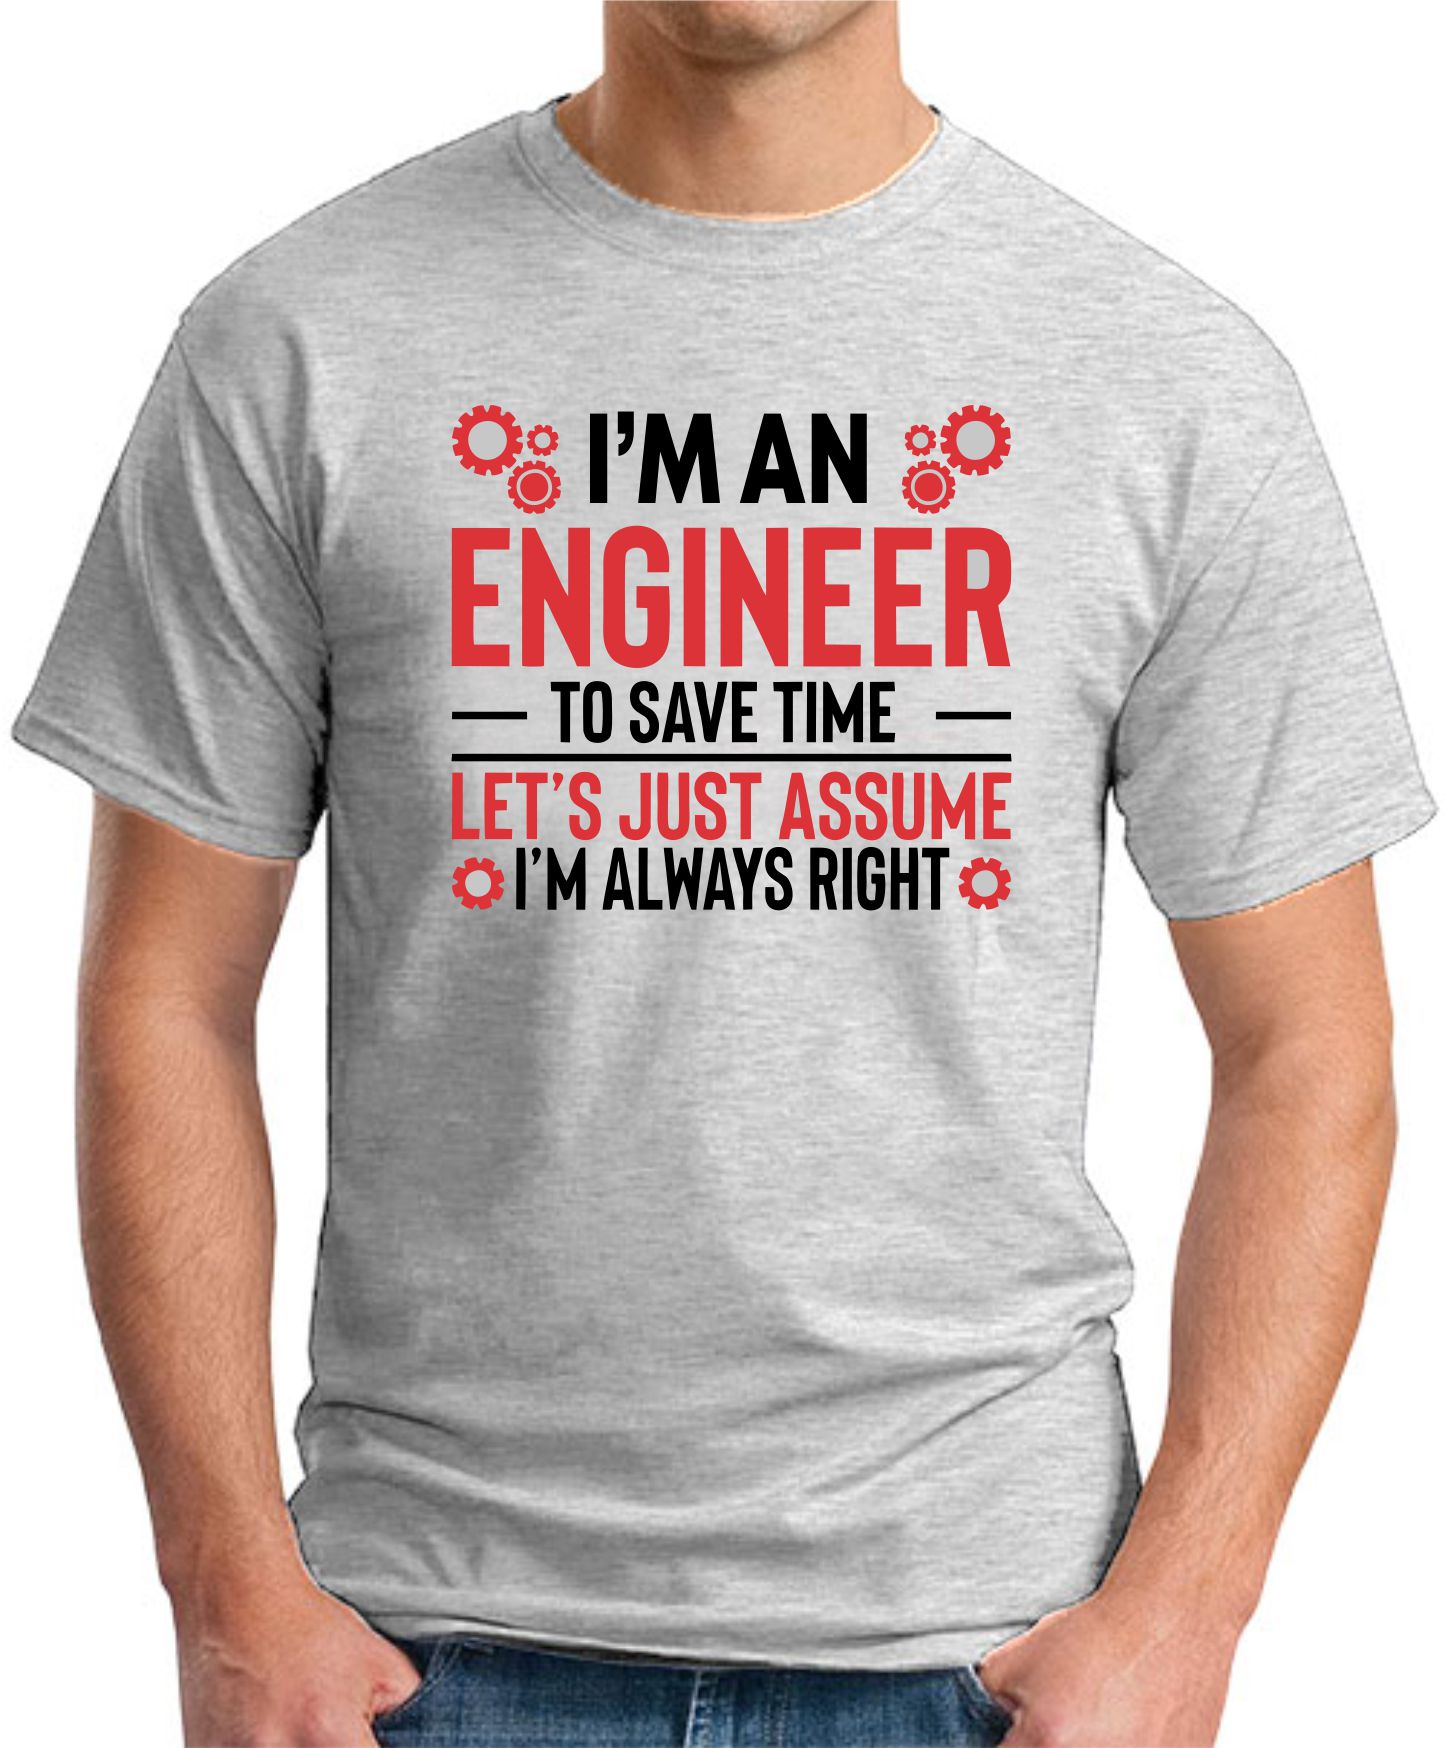 I'm An Engineer Assume I'm Always Right ash grey